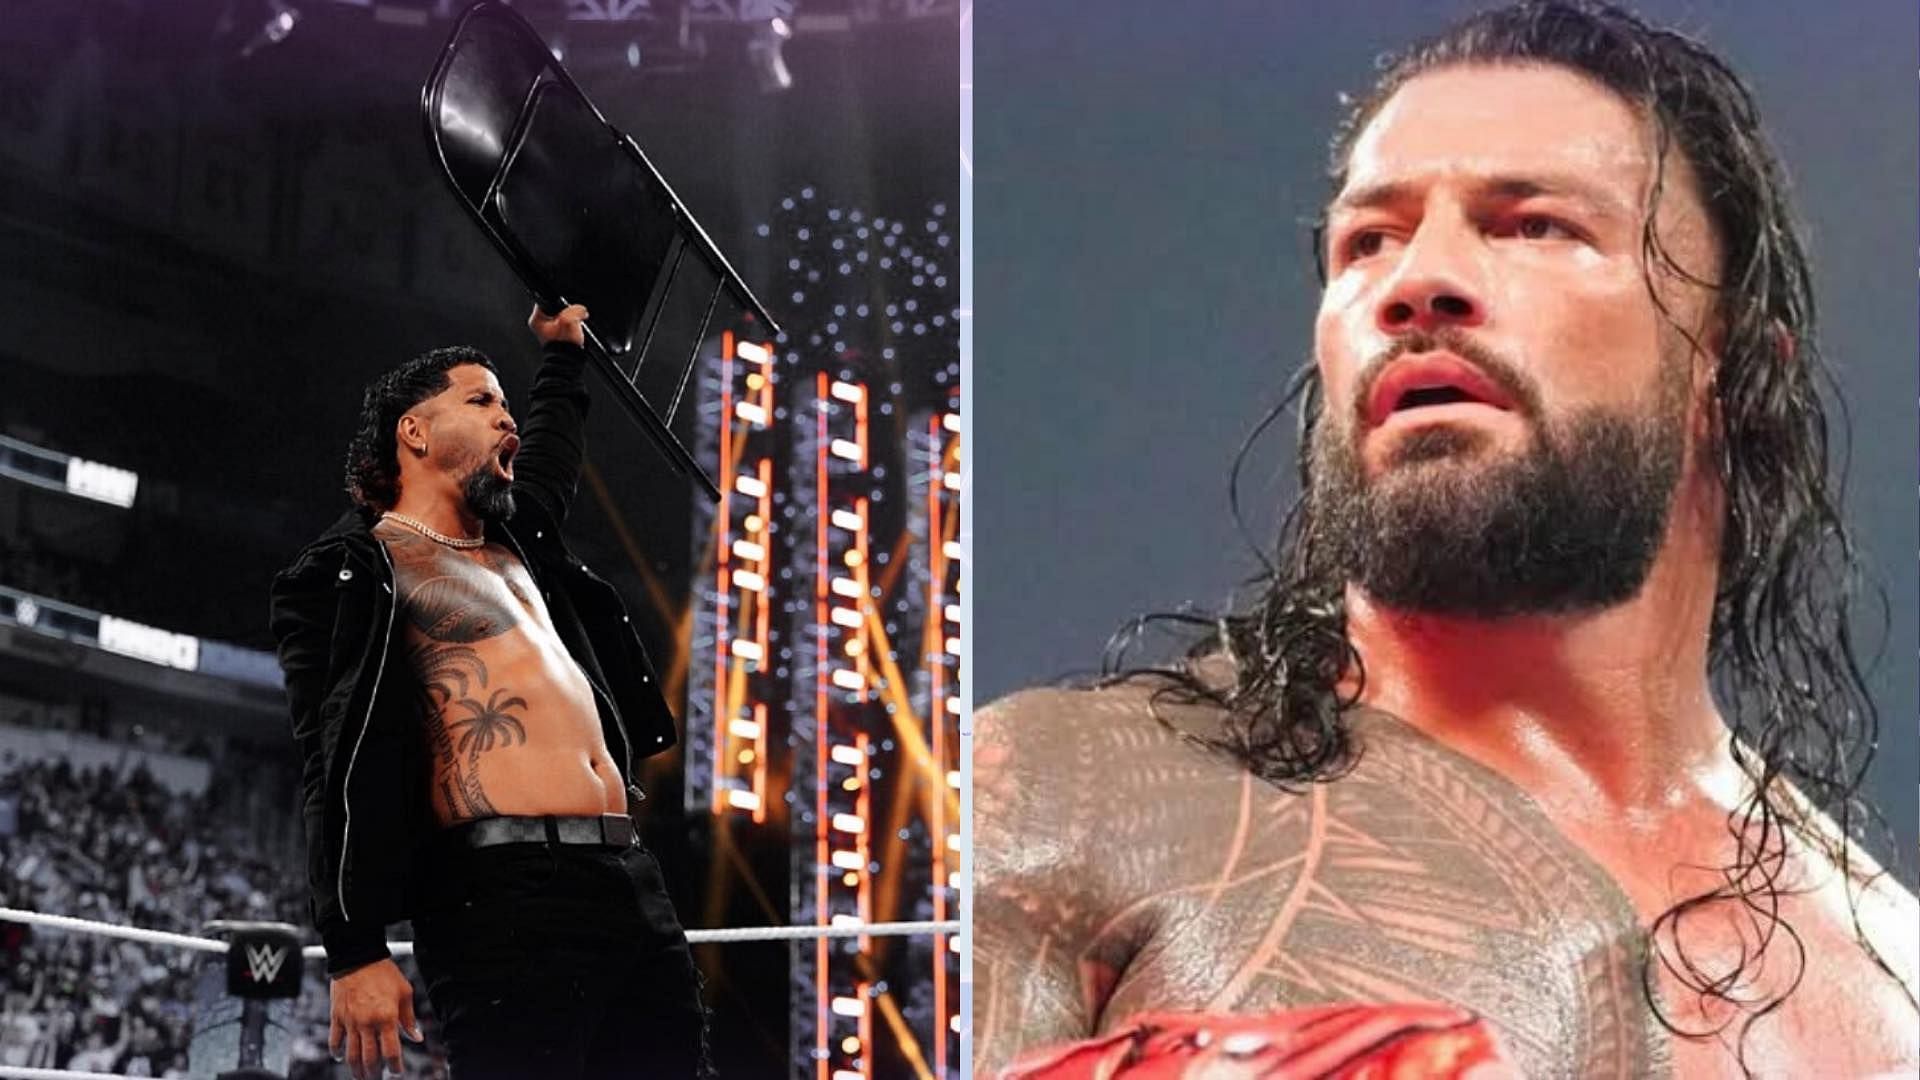 Jey Uso is set to clash with Roman Reigns for the Undisputed WWE Universal Championship